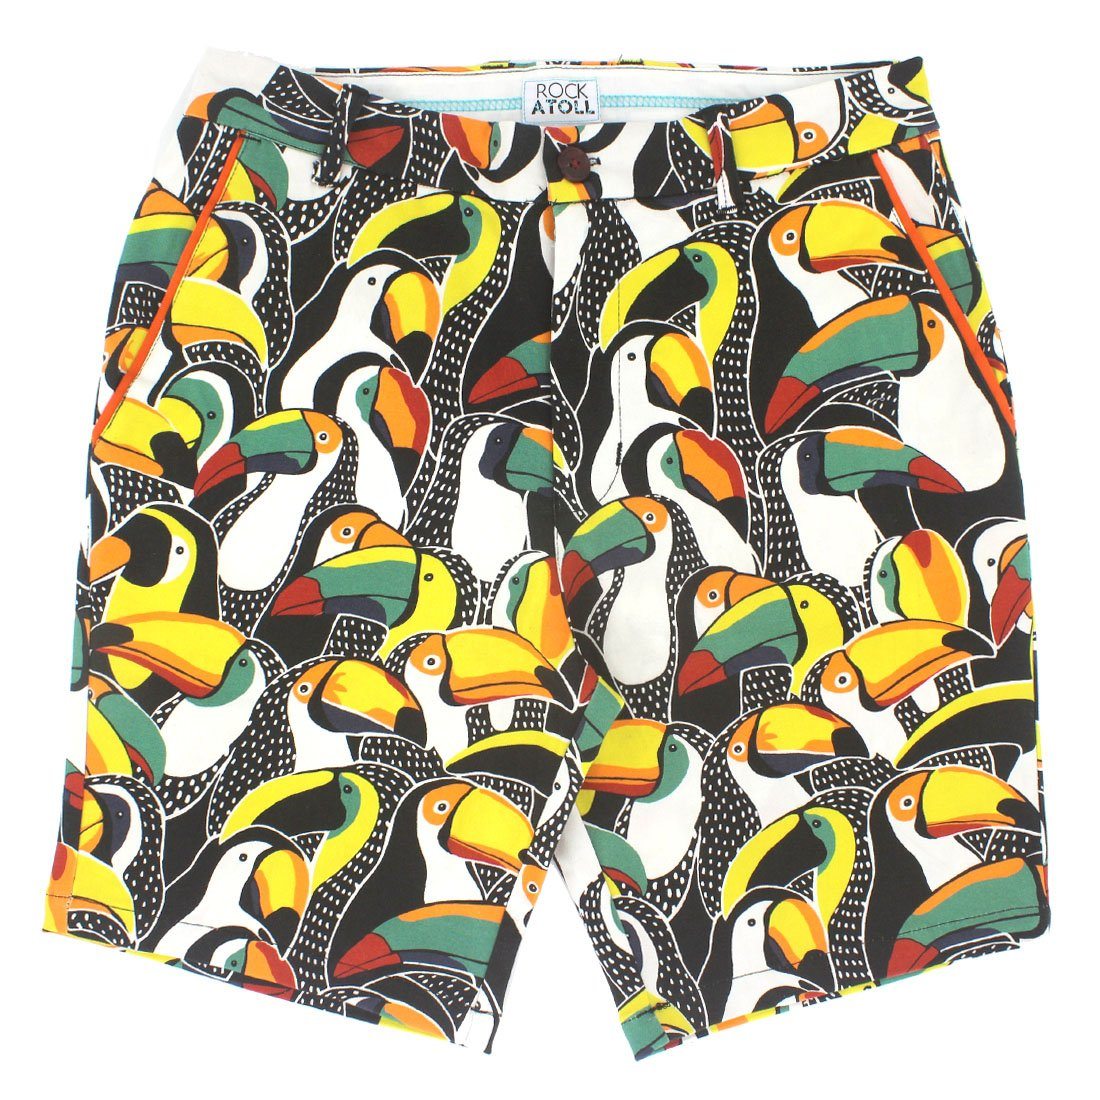 Men's Shorts // Free Shipping and Returns